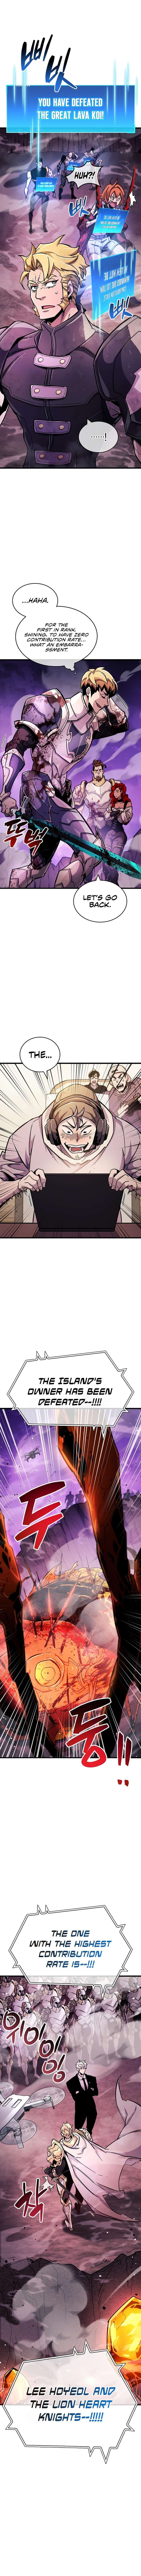 The Player Hides His Past Chapter 24 page 7